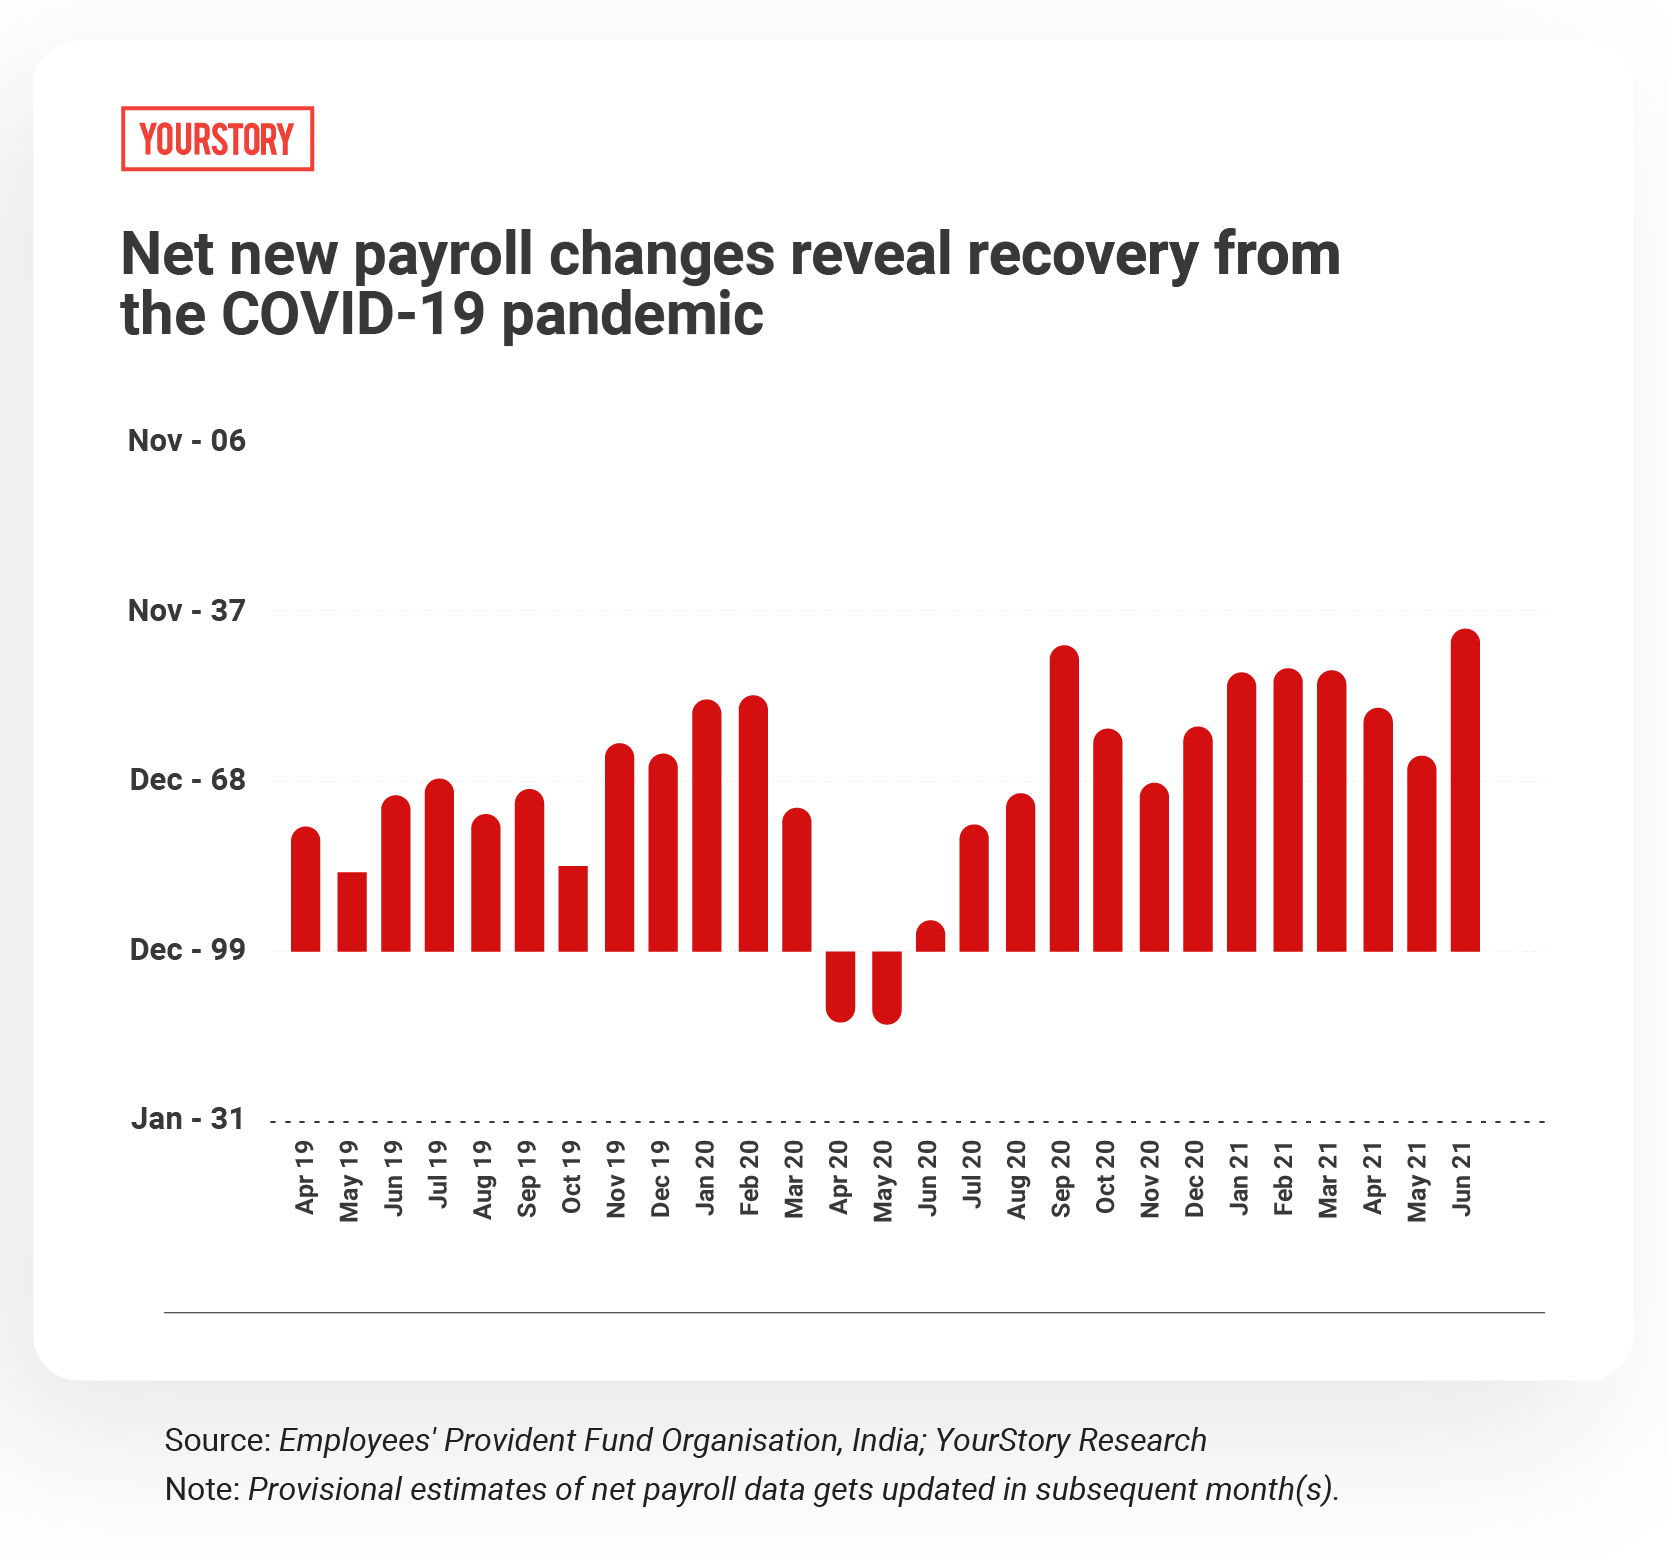 Net new payroll changes reveal recovery from the COVID-19 pandemic